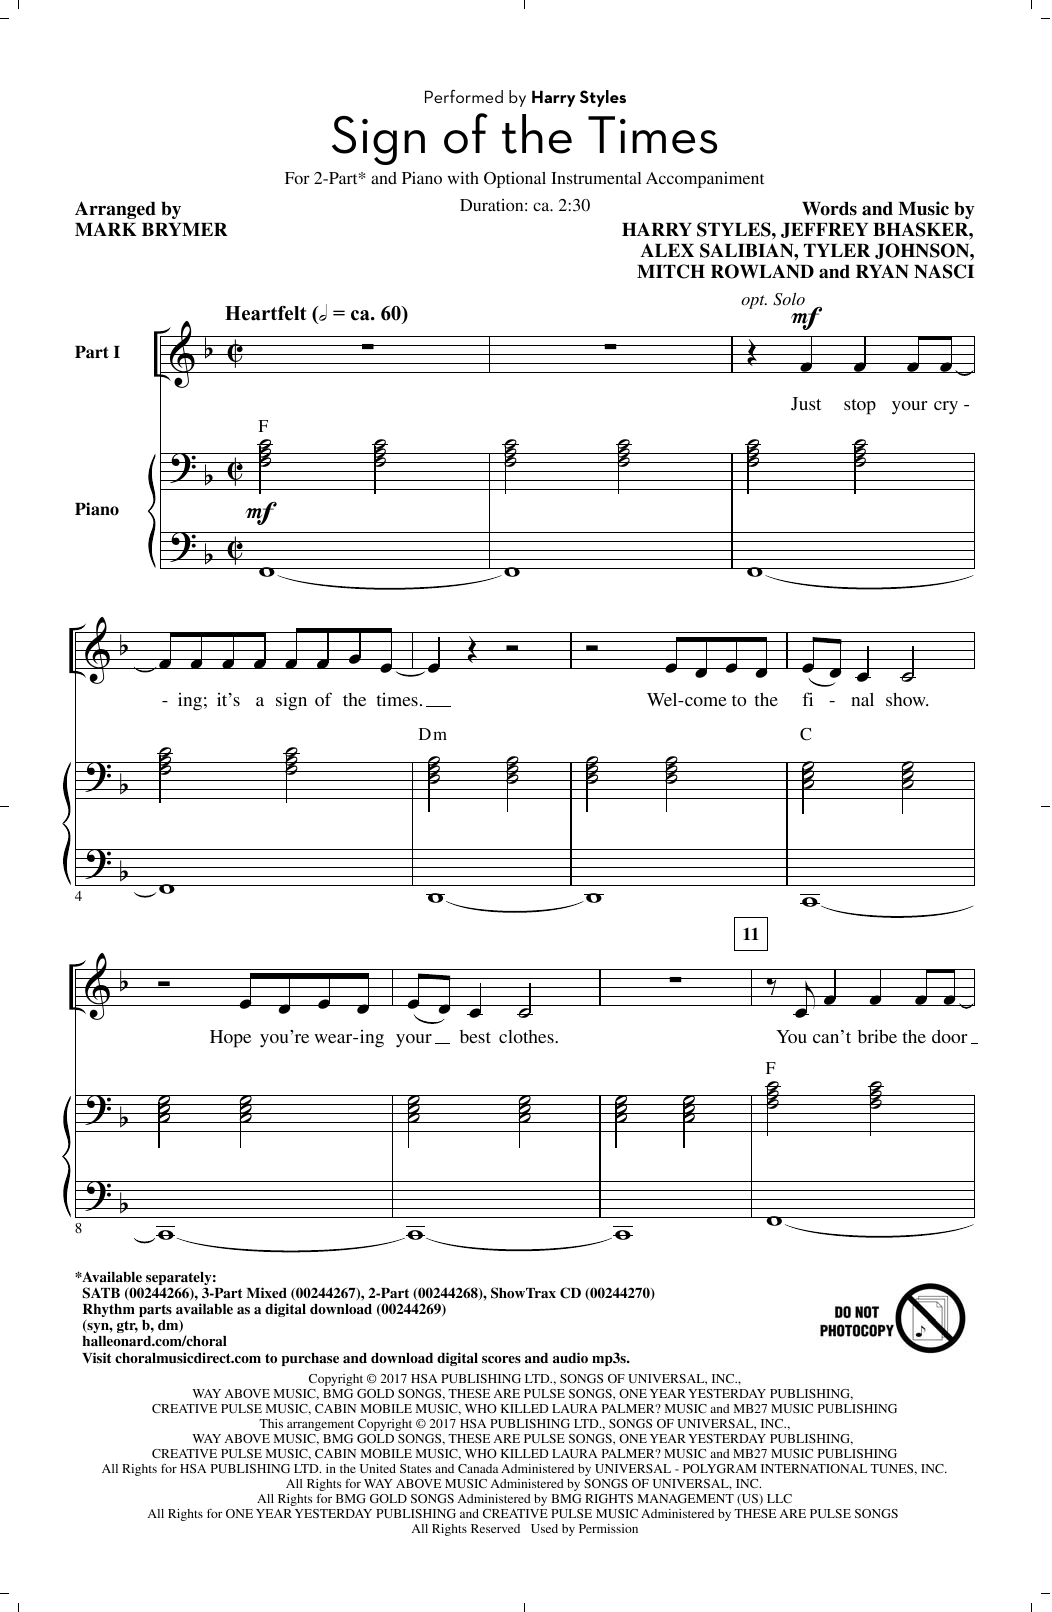 Download Mark Brymer Sign Of The Times Sheet Music